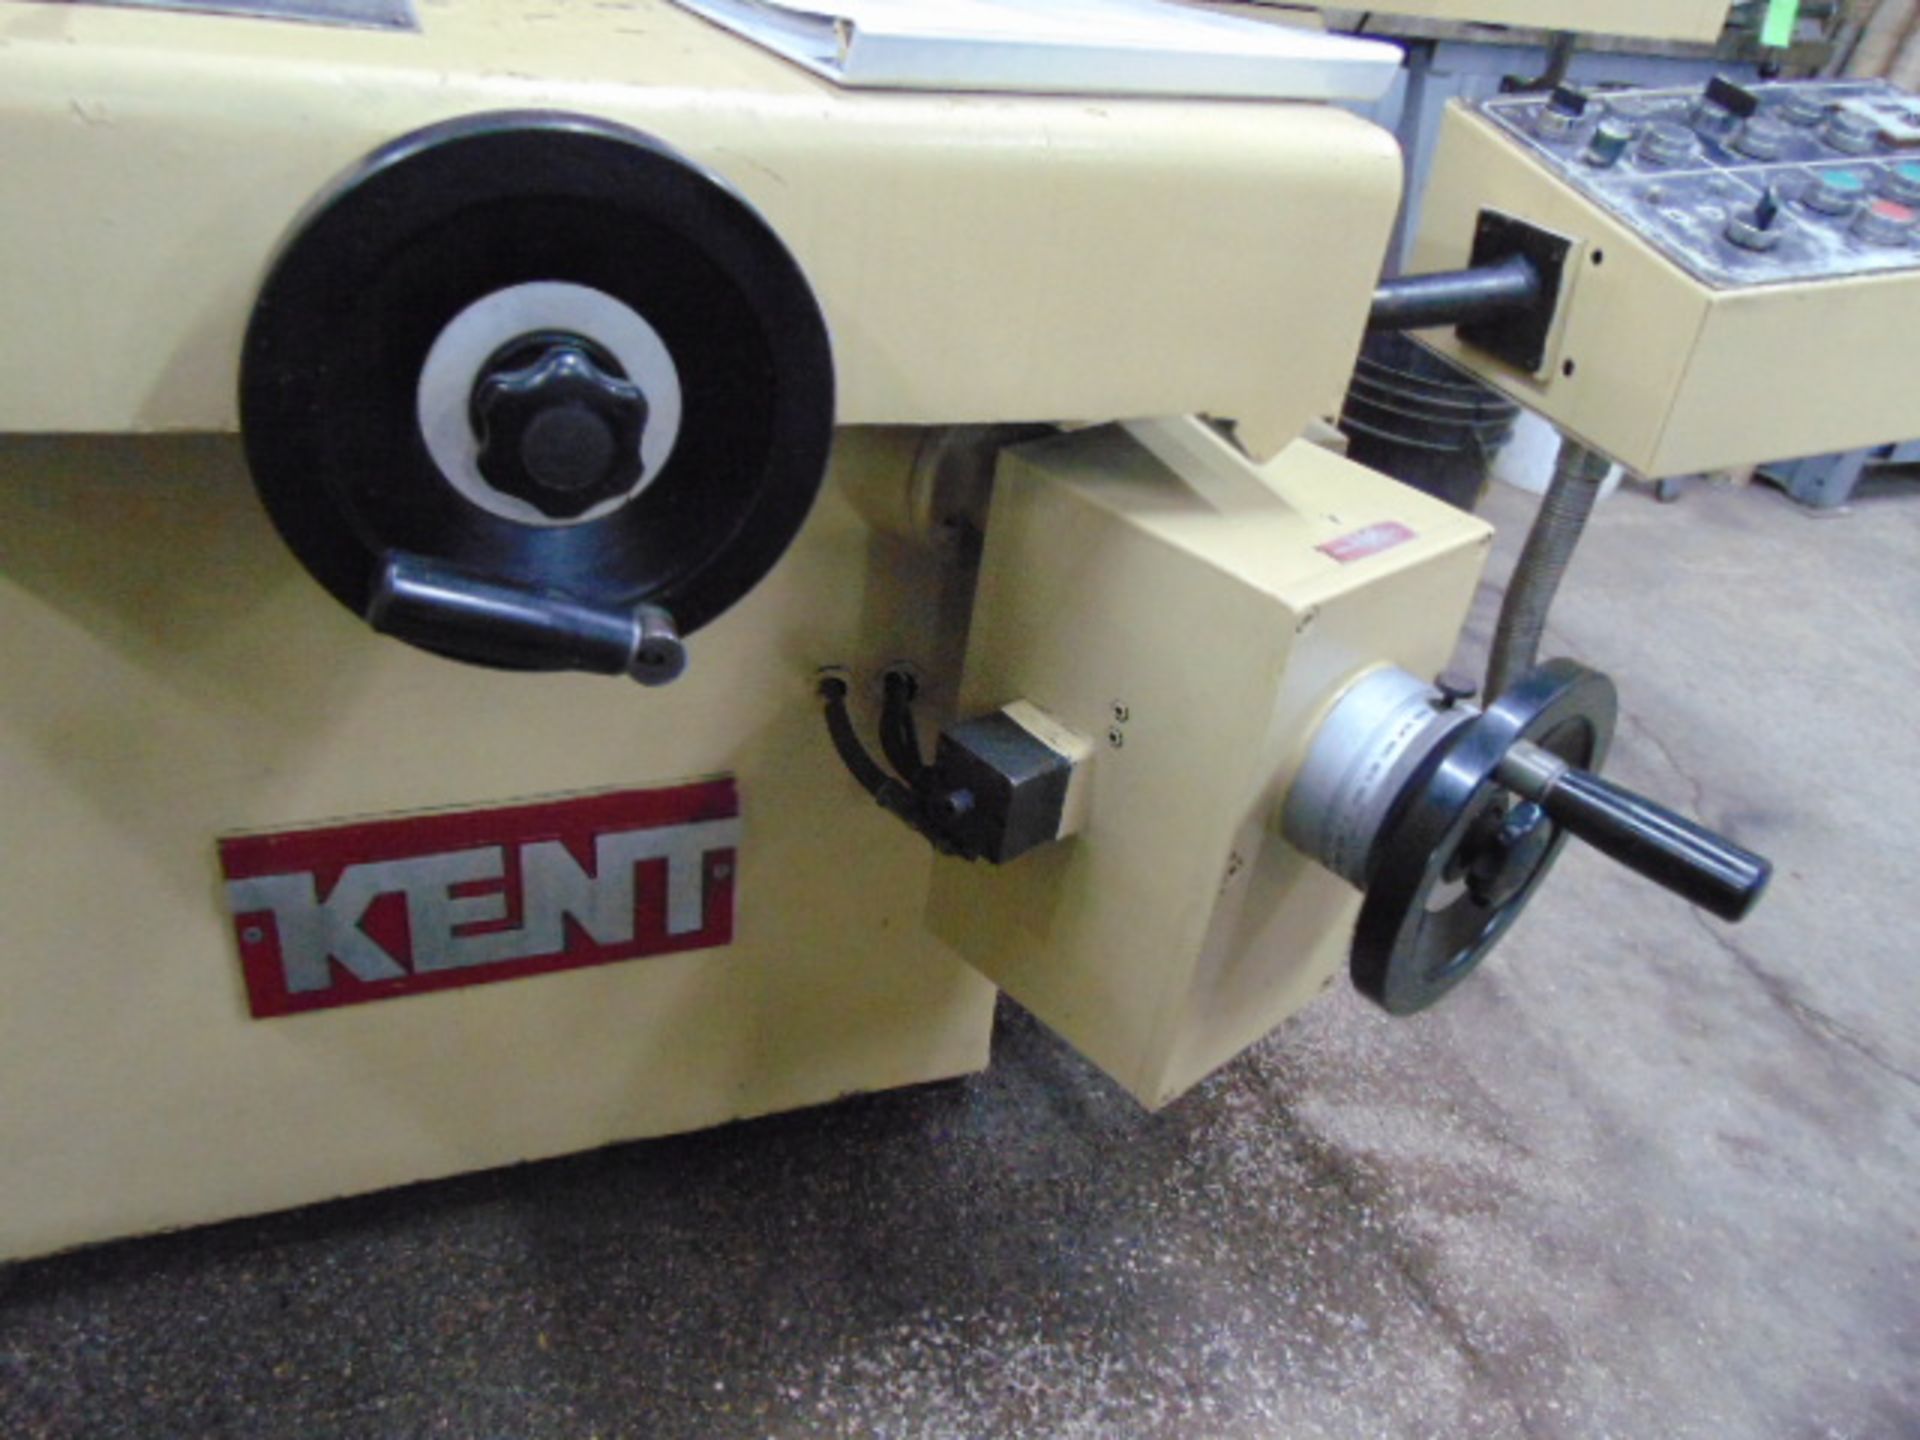 HYDRAULIC SURFACE GRINDER, KENT 12” X 24” MDL. KGS-306AHD, incremental downfeed, 12” x 2” max. wheel - Image 4 of 5